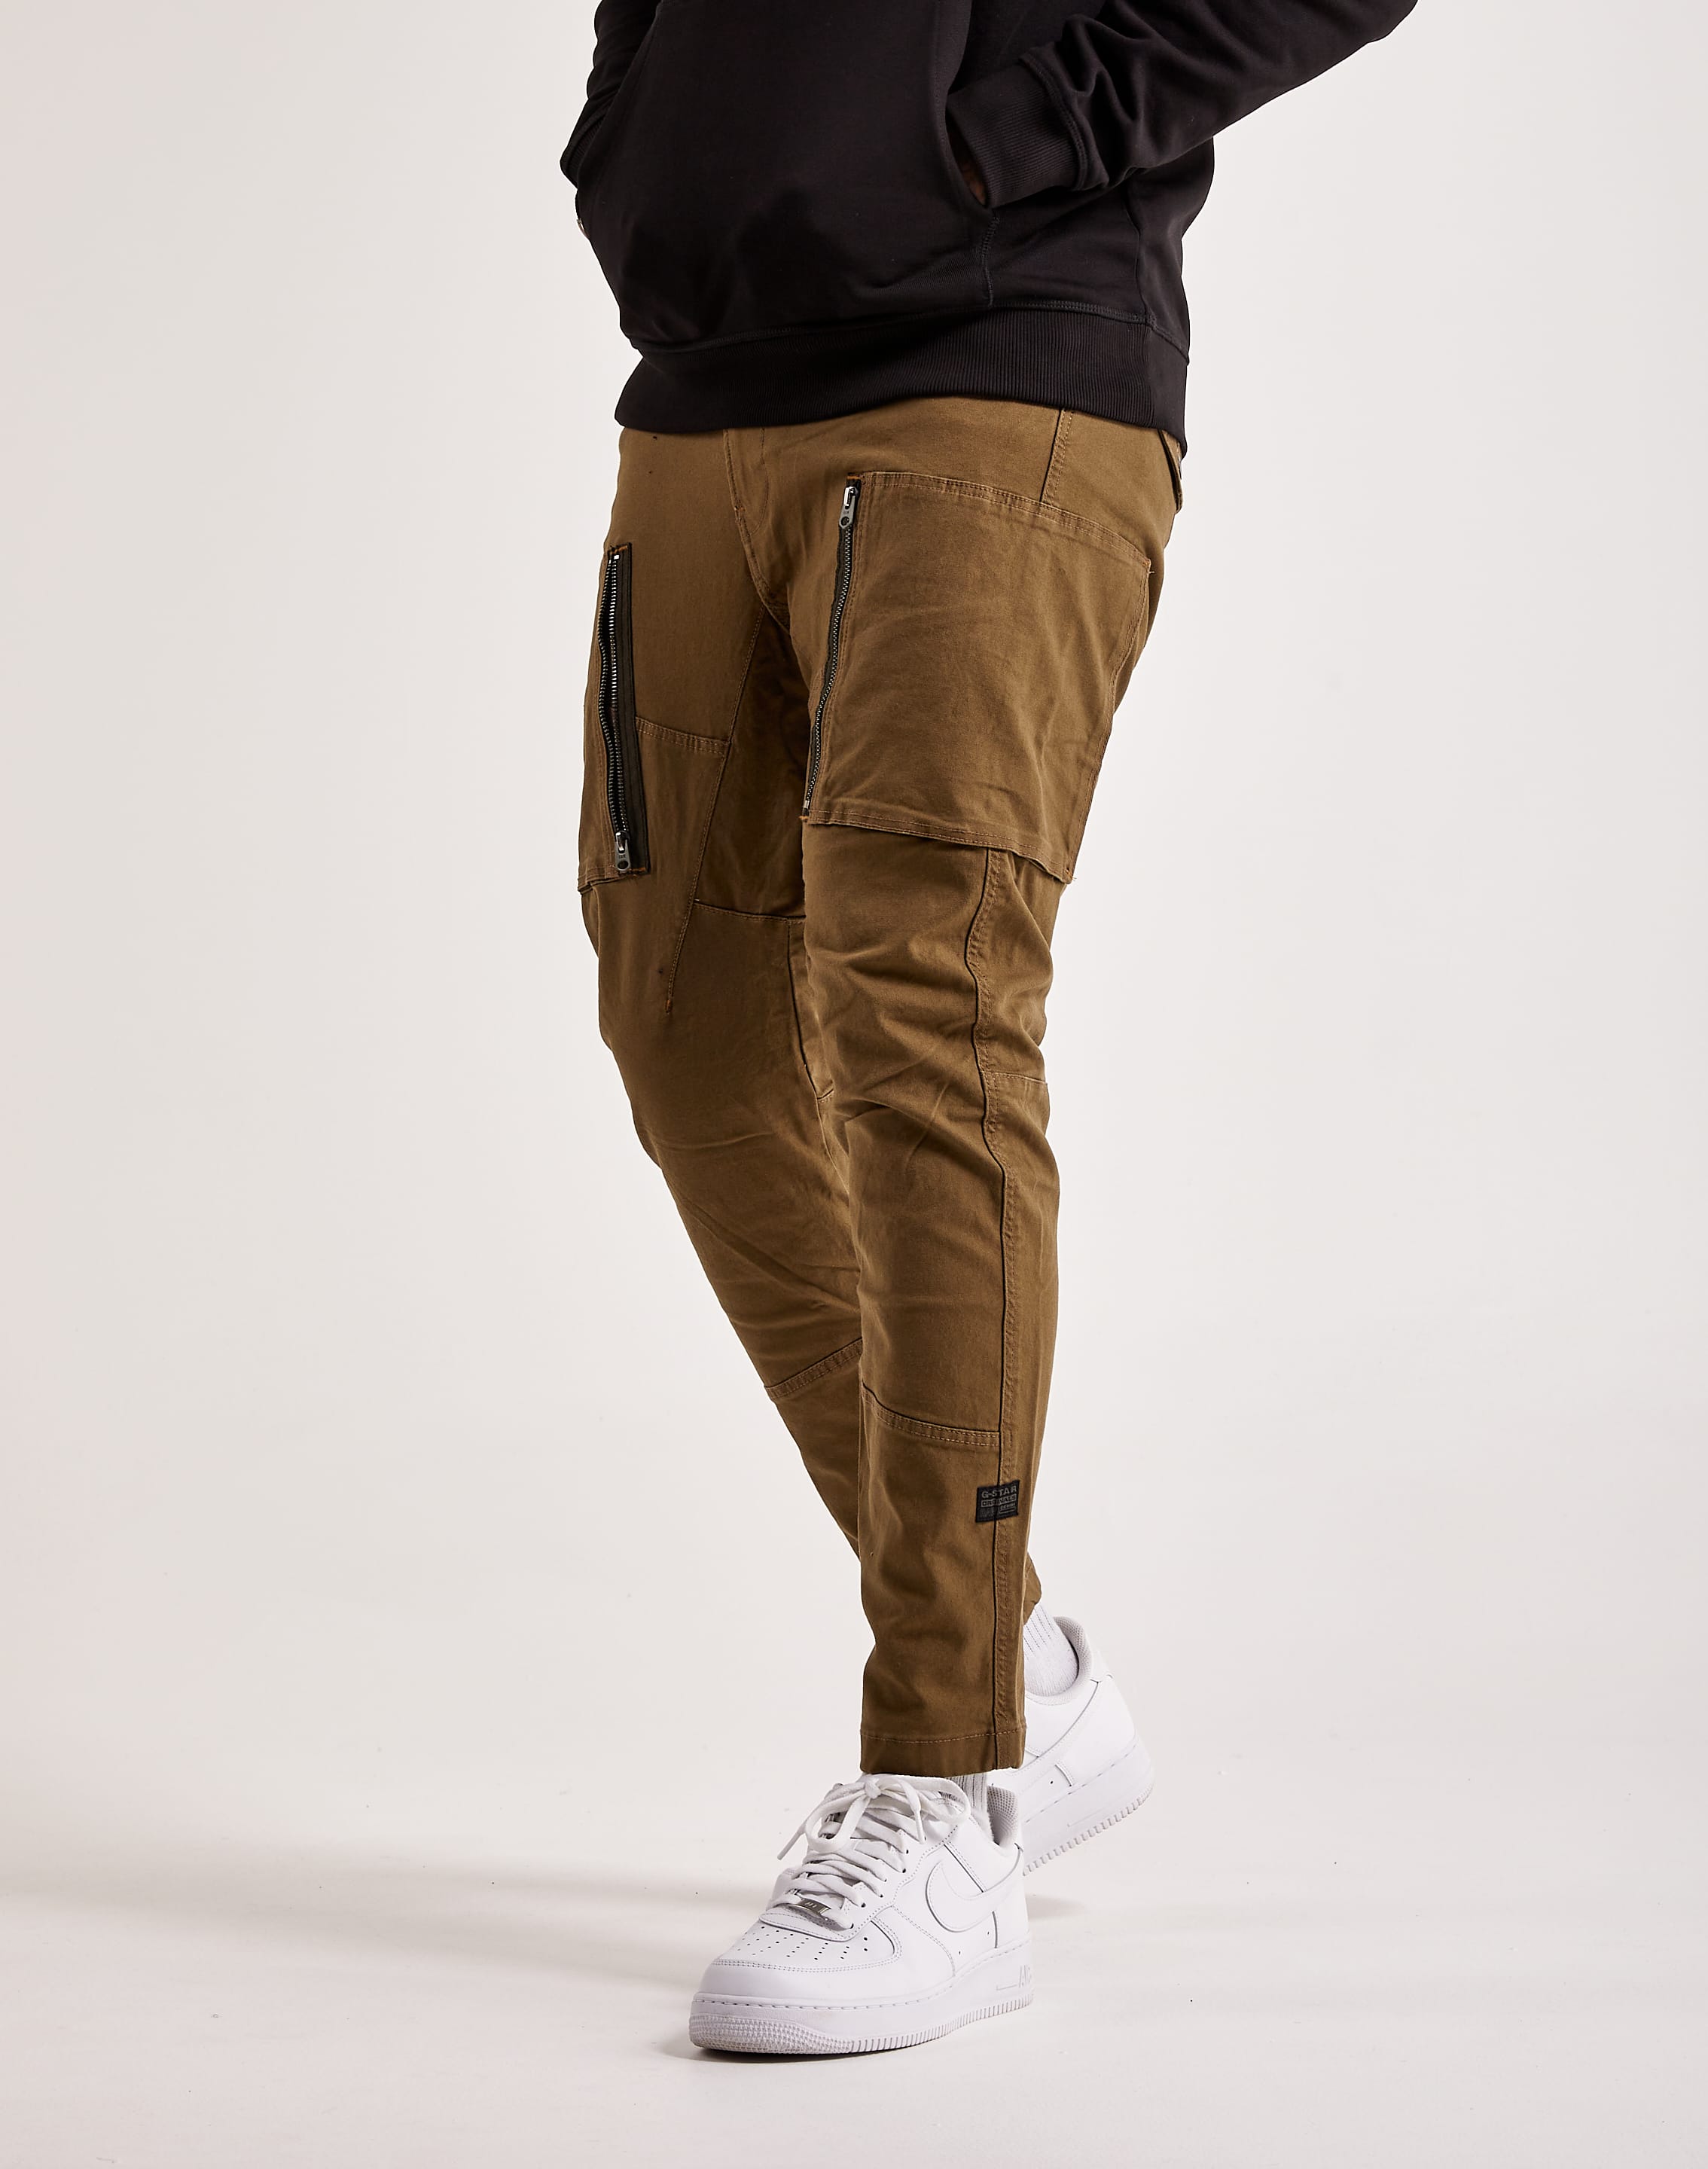 G-Star RAW | Cargo Pants – Saturday's Fit